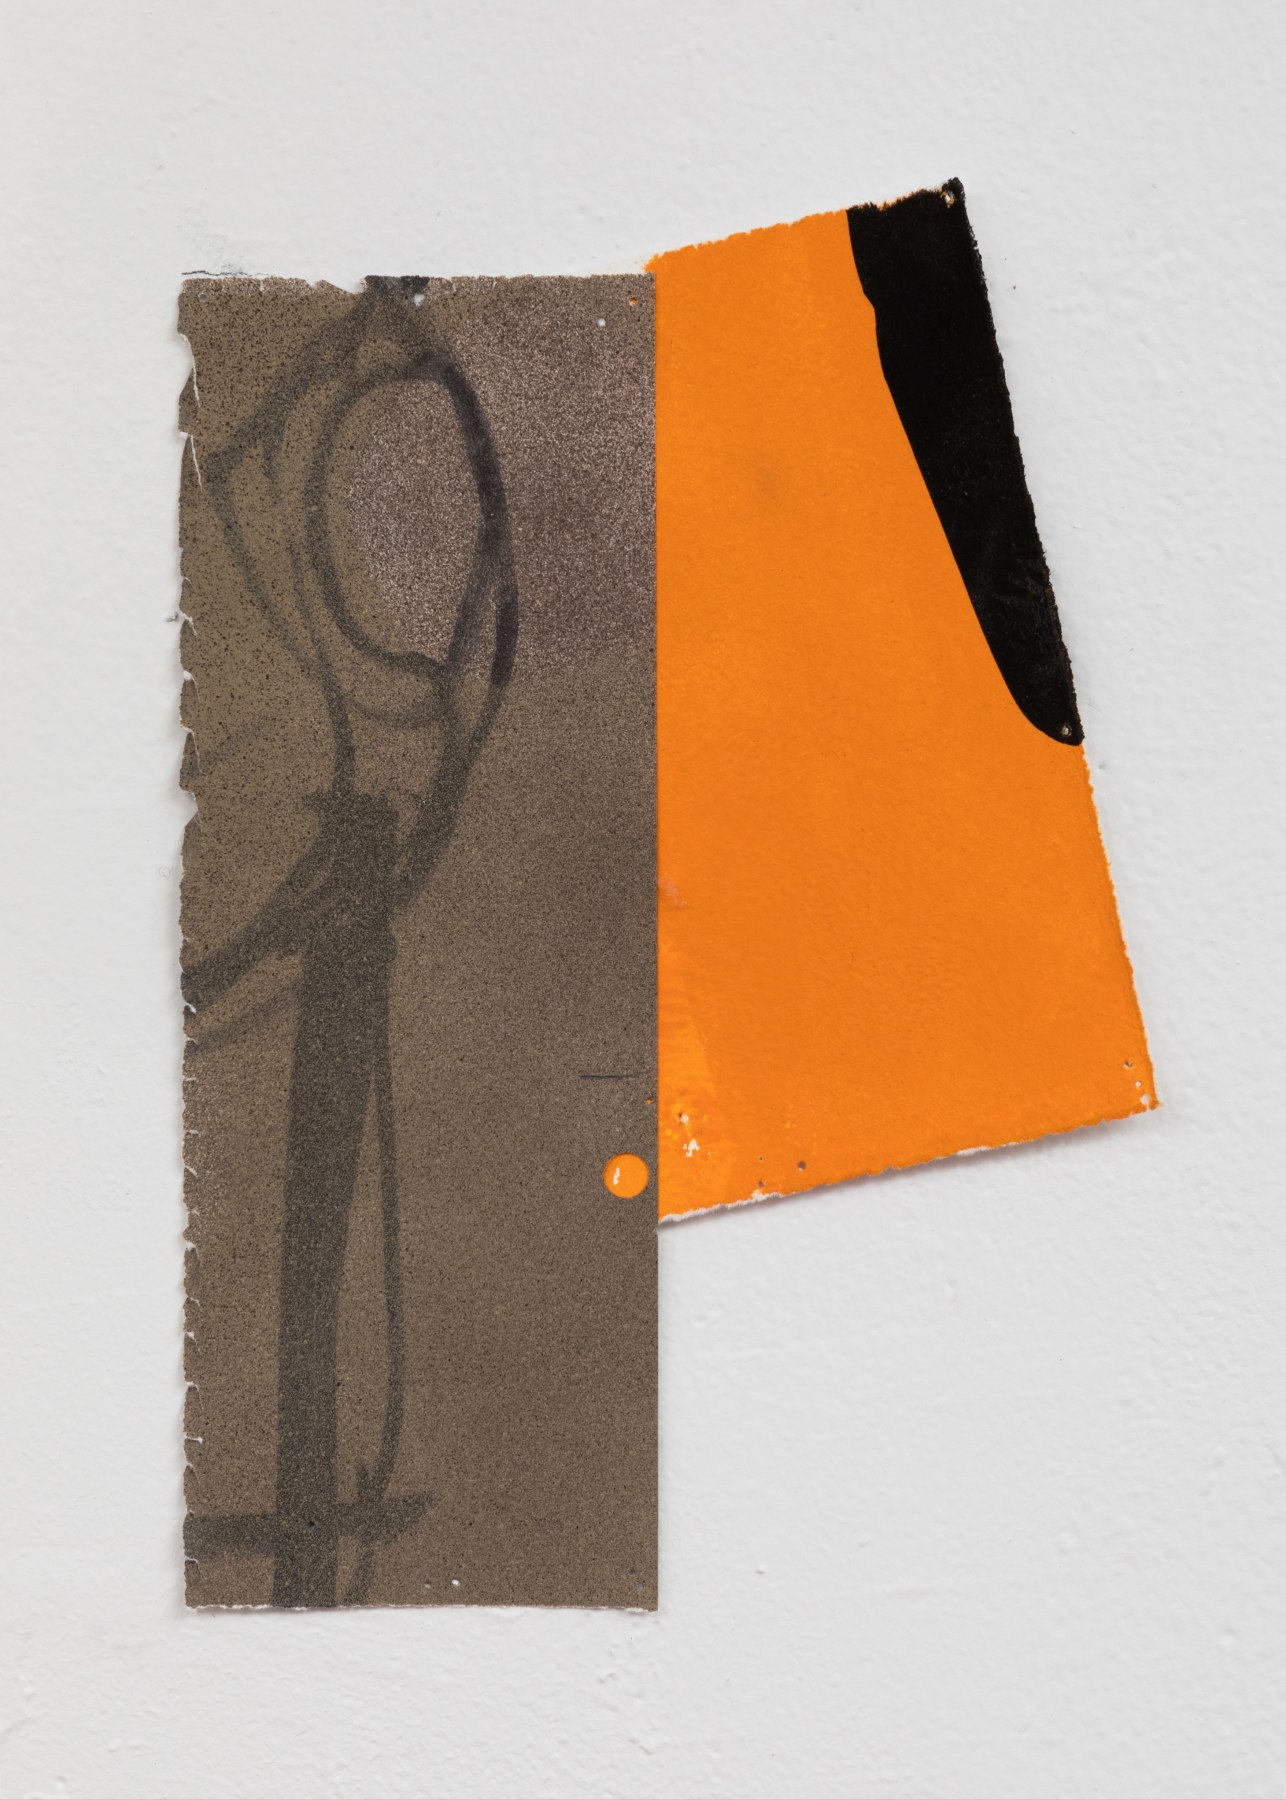 George Negroponte, Marriage (made with Virva Hinnemo),&nbsp;2006, 2018,&nbsp;Gouache and spray paint on paper, 9&quot; x 6&quot; at Anita Rogers Gallery